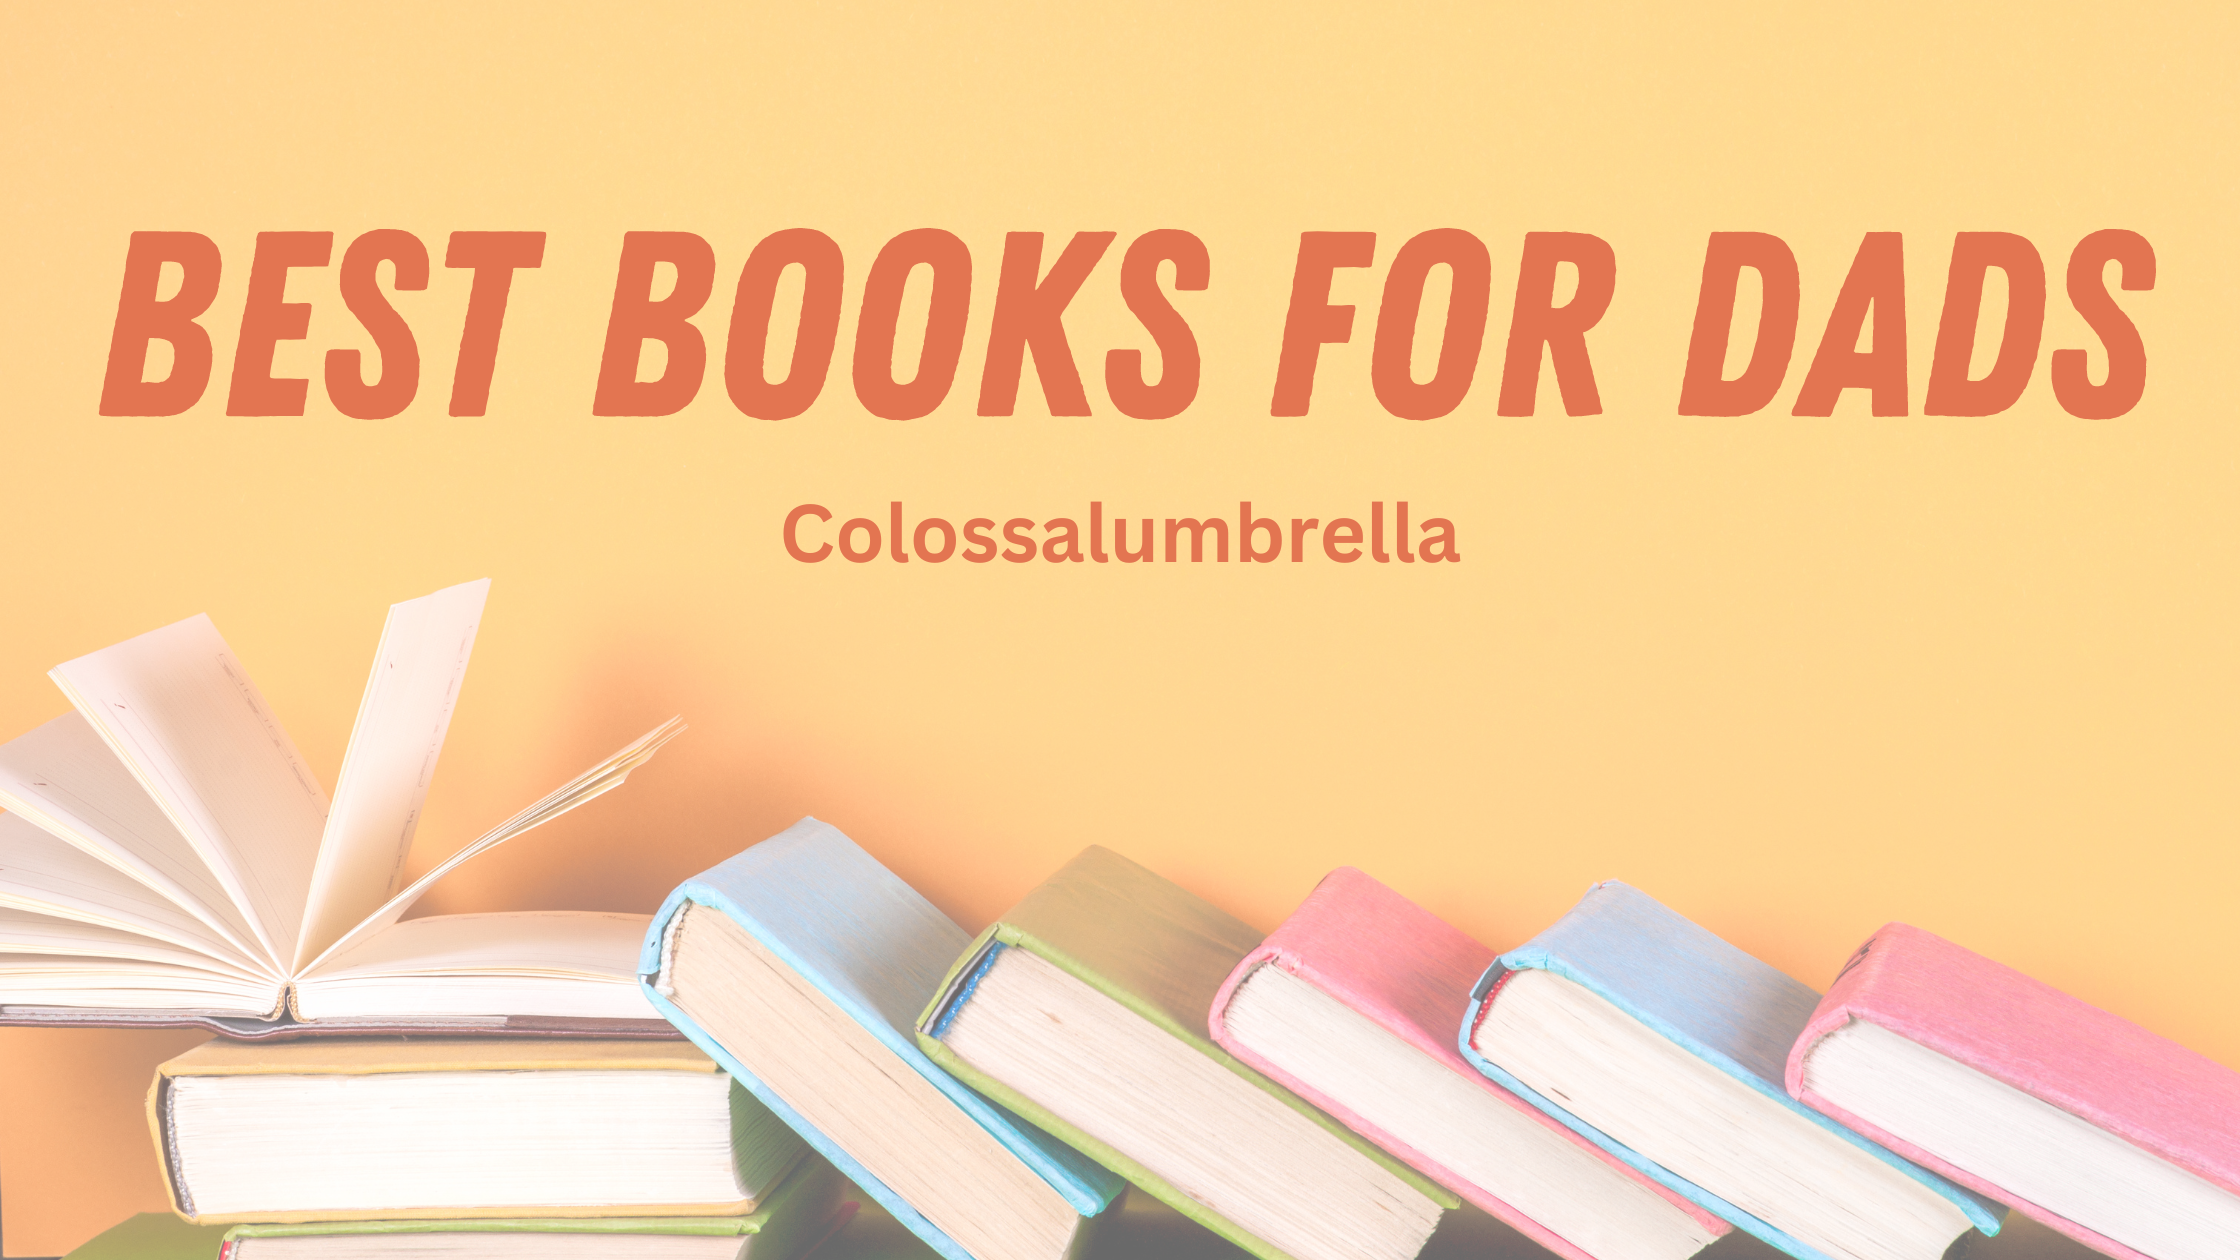 15 Best books for first time dad - collection by Colossalumbrella